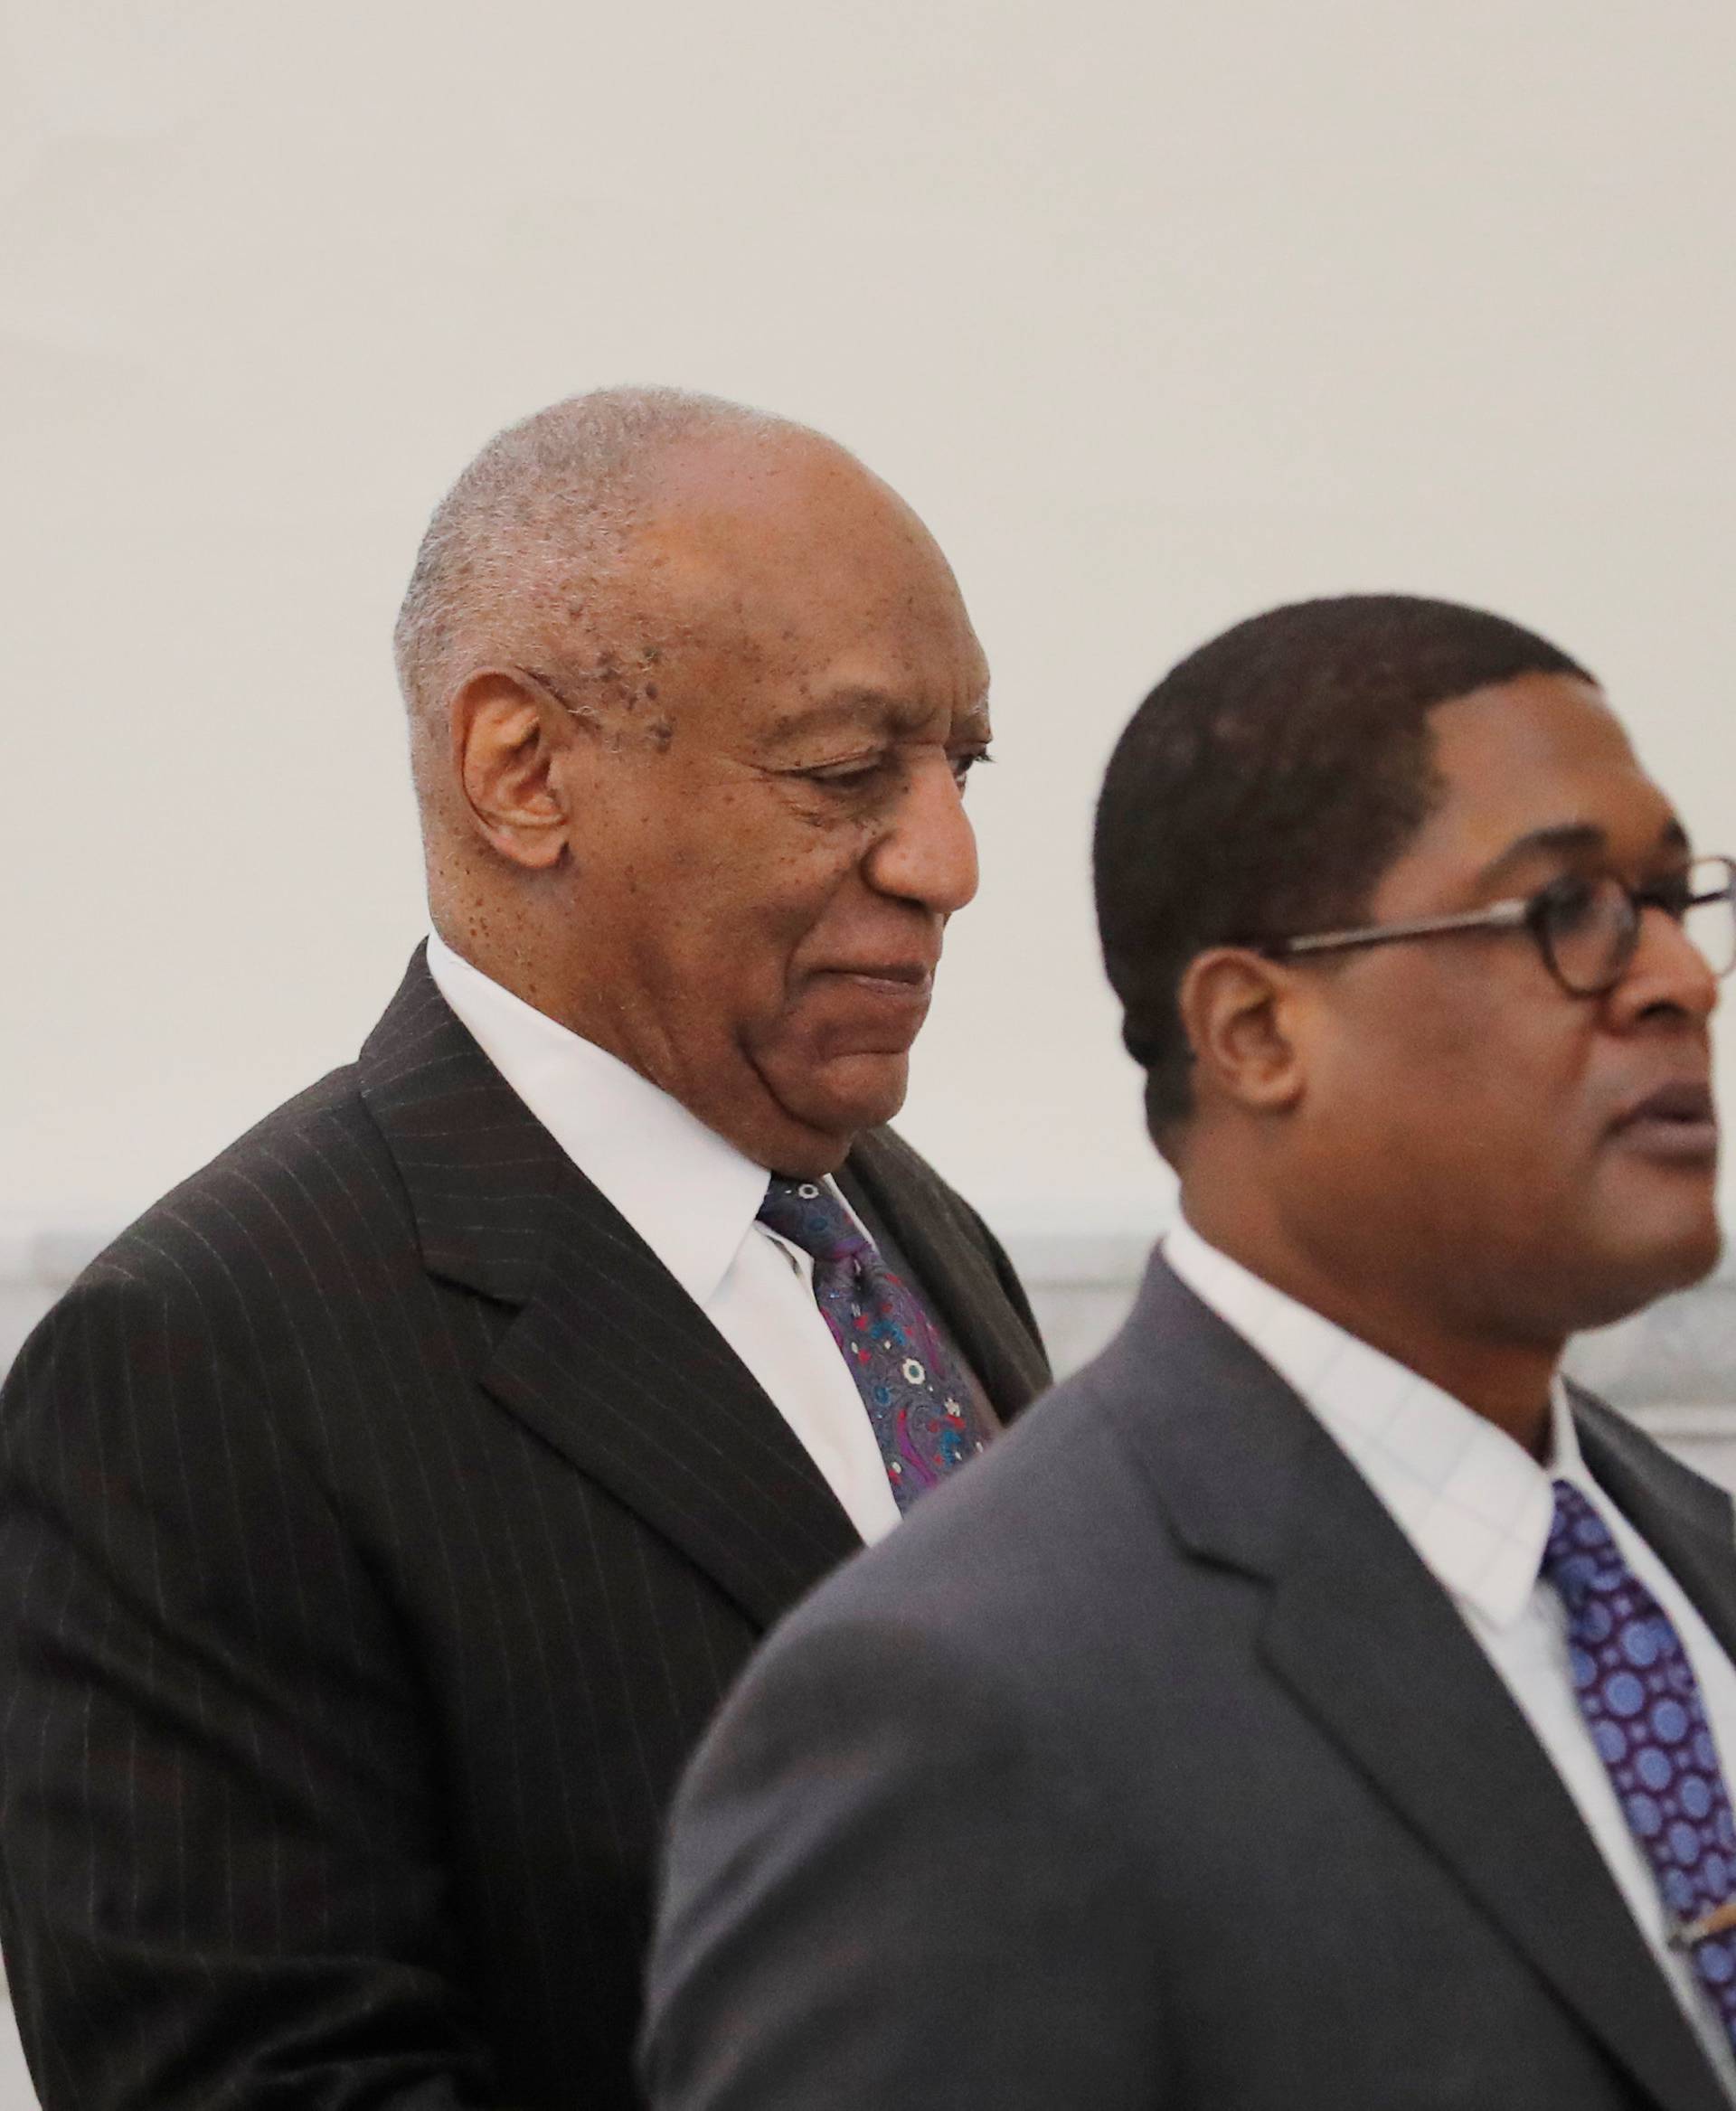 Actor and comedian Bill Cosby departs the courtroom during the first day of his sexual assault retrial at the Montgomery County Courthouse in Norristown, Pennsylvania